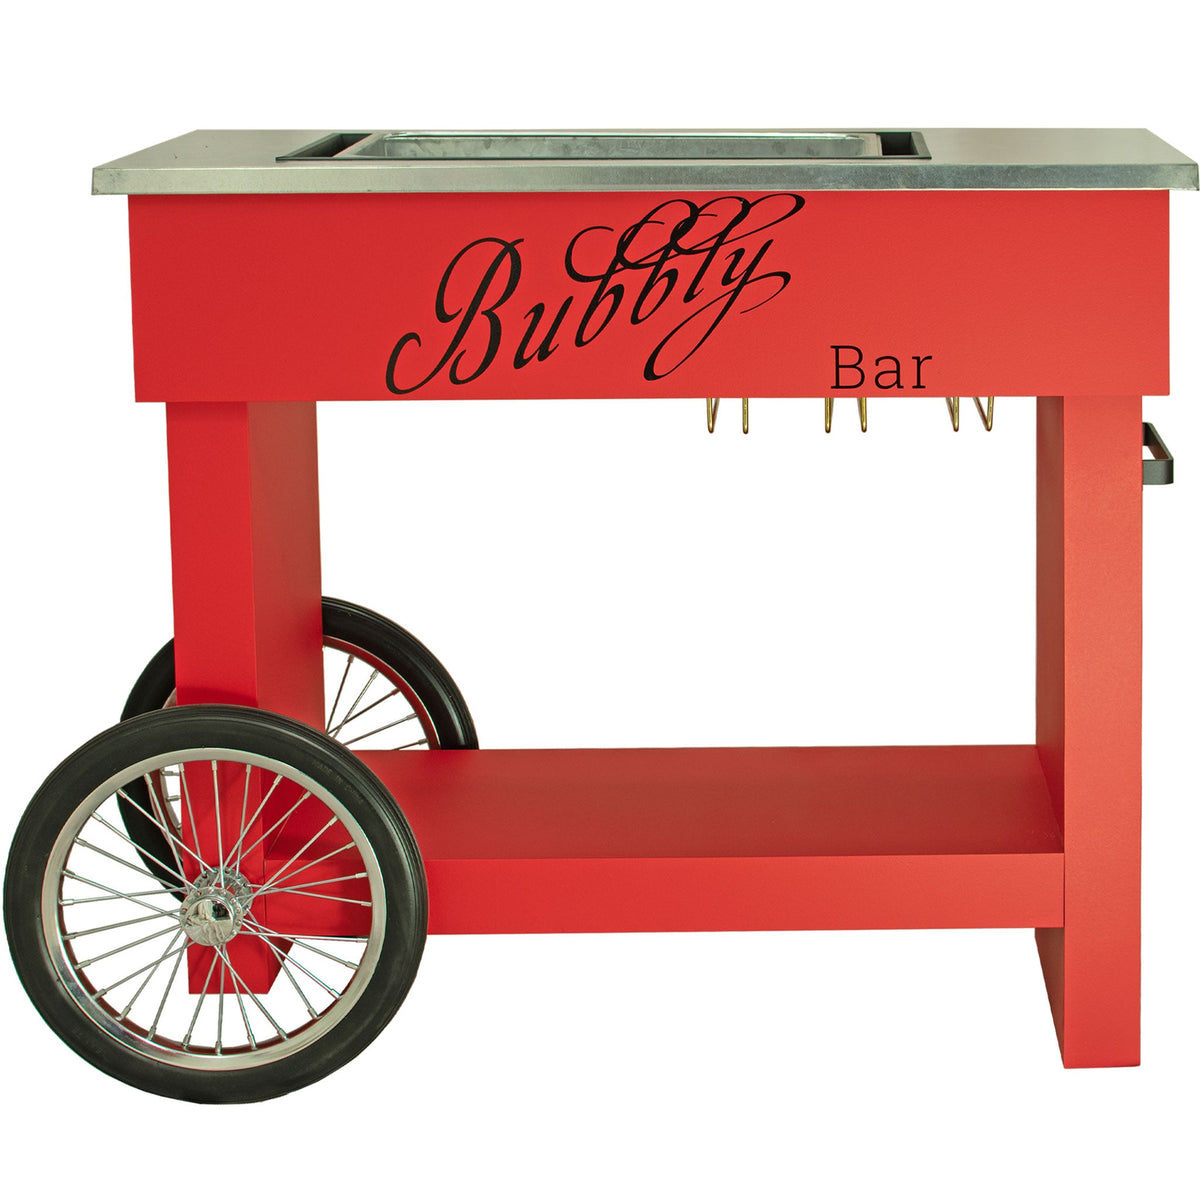 Lee Display's Champagne and Wine Bar Cart with Wheels in Red Color and a Bubbly Bar Decal